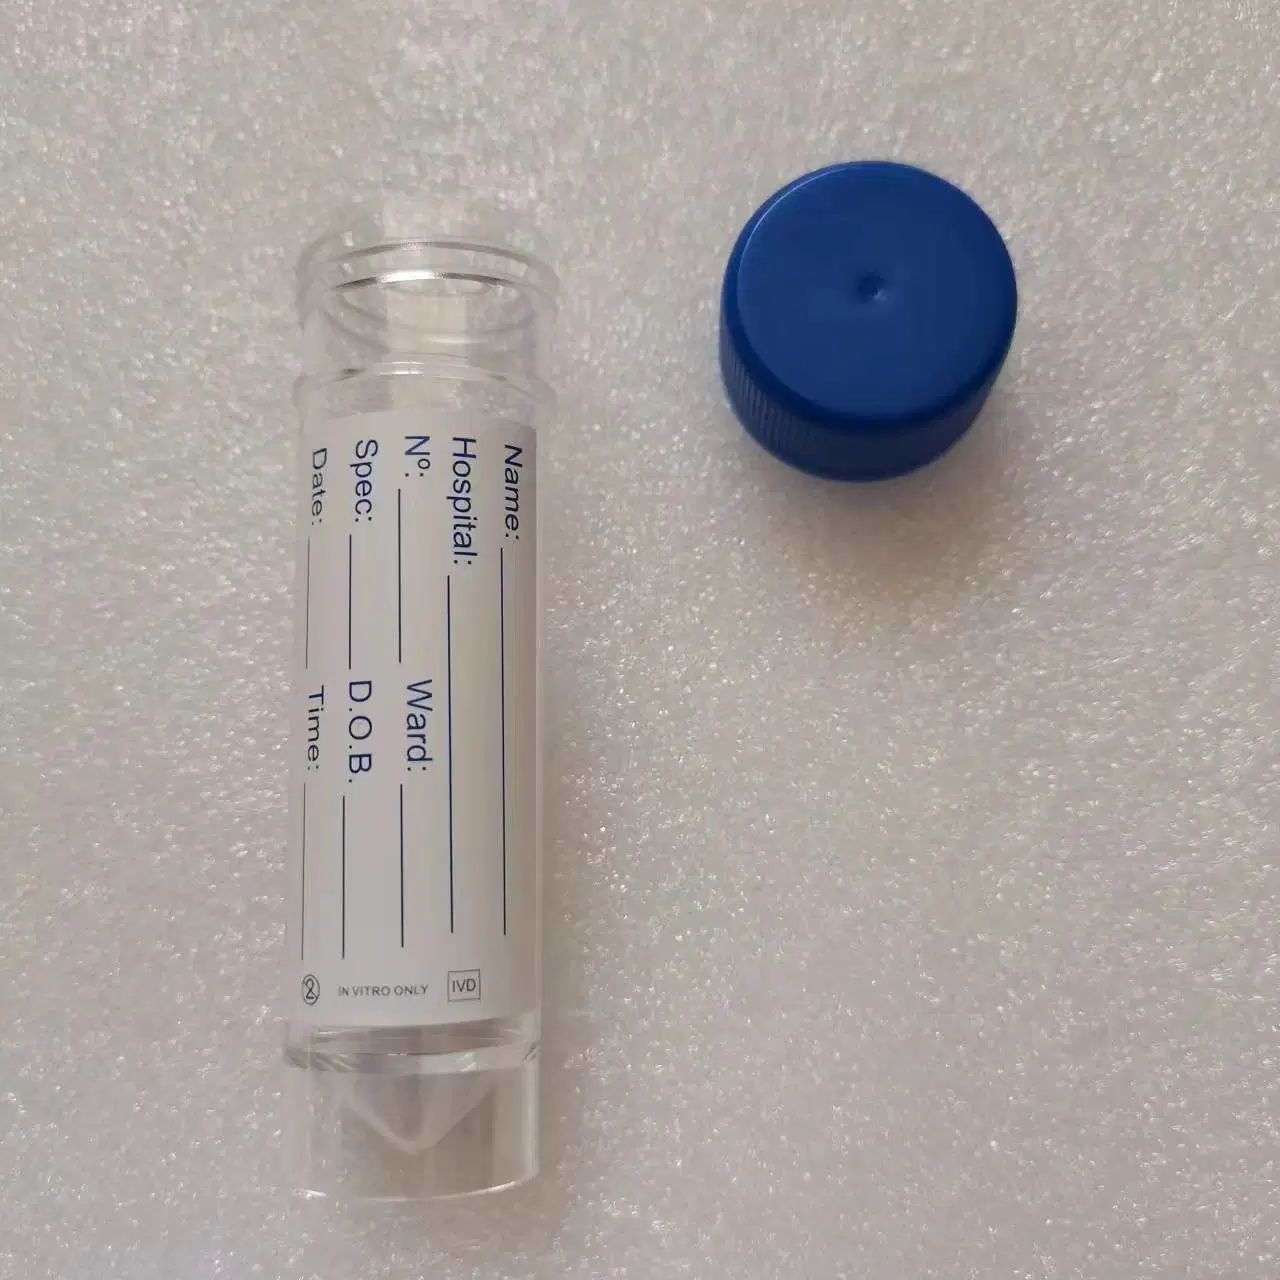 Hospital Use Sterile Urine Container 30ml Specimen Cups with Leak Proof